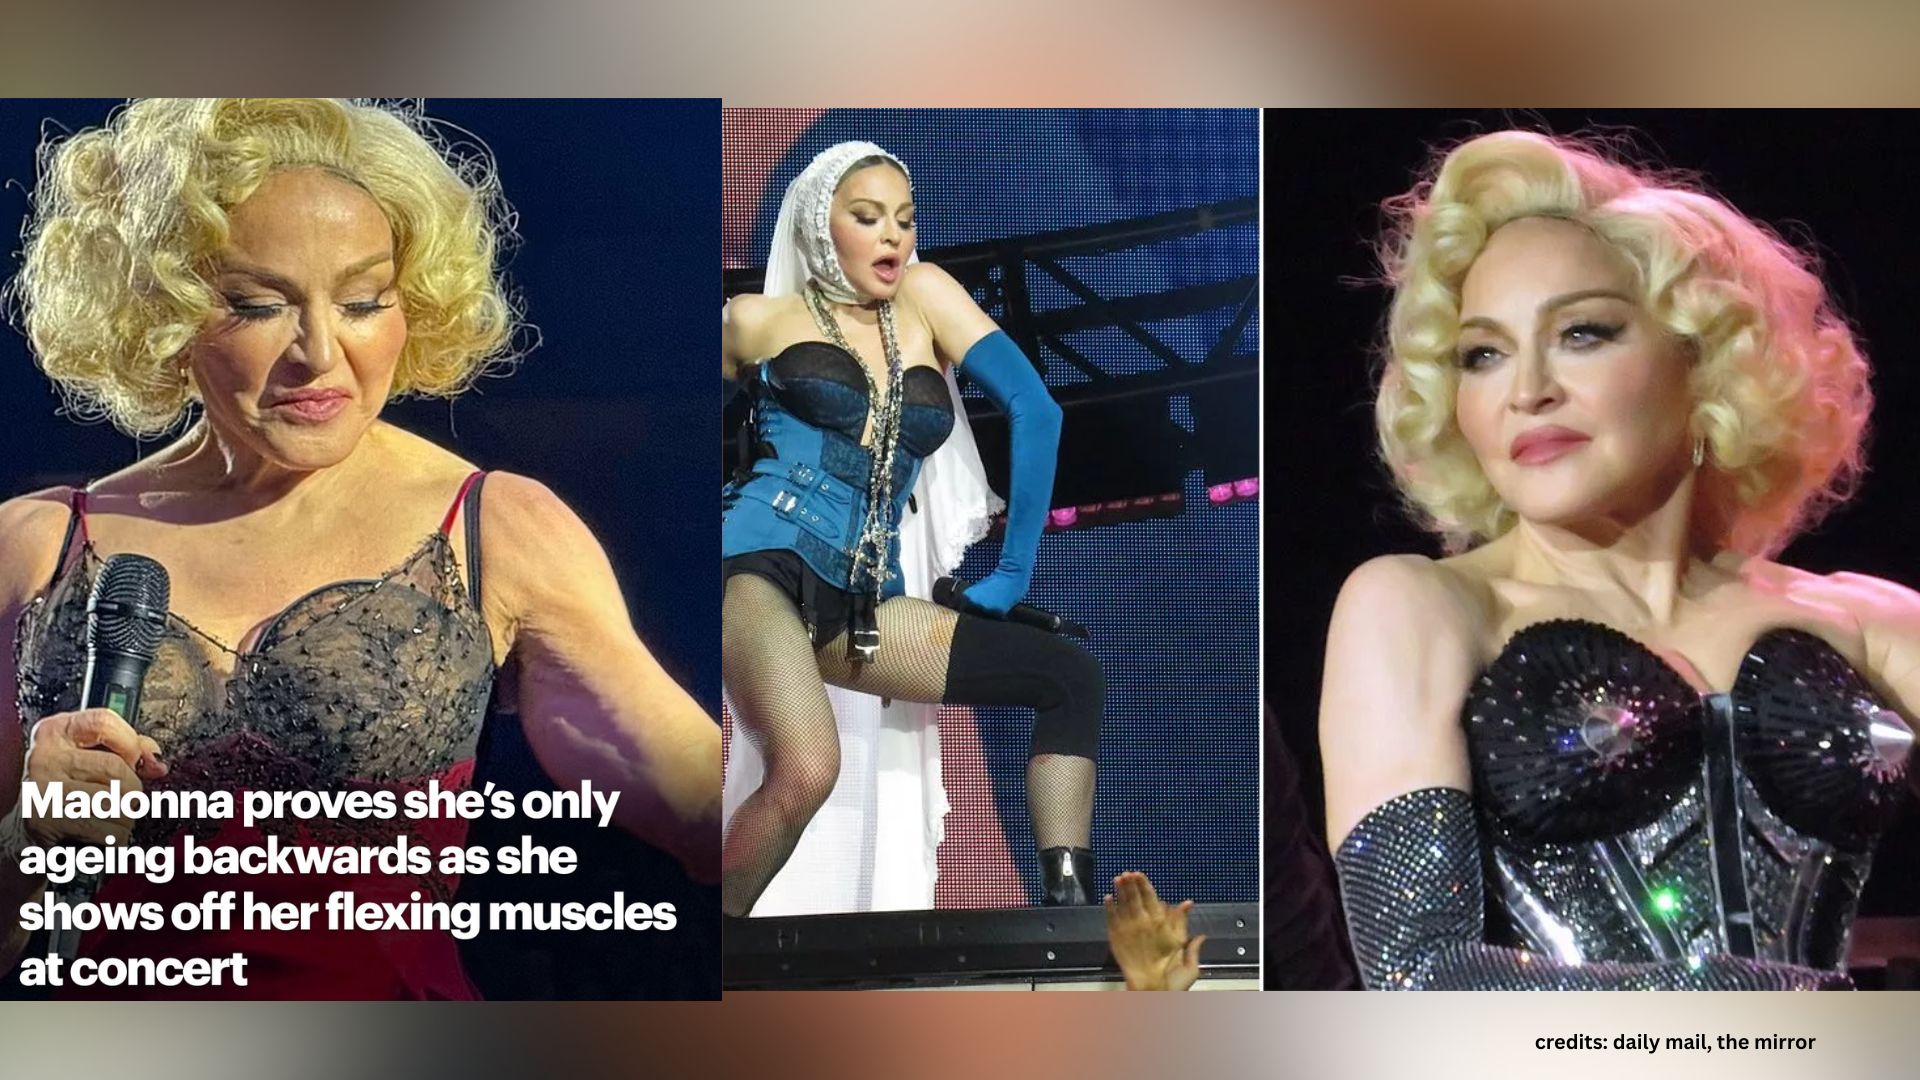 Madonna Mesmerizes Madison Square Garden Crowd, Displays Fitness Amid Legal Woes